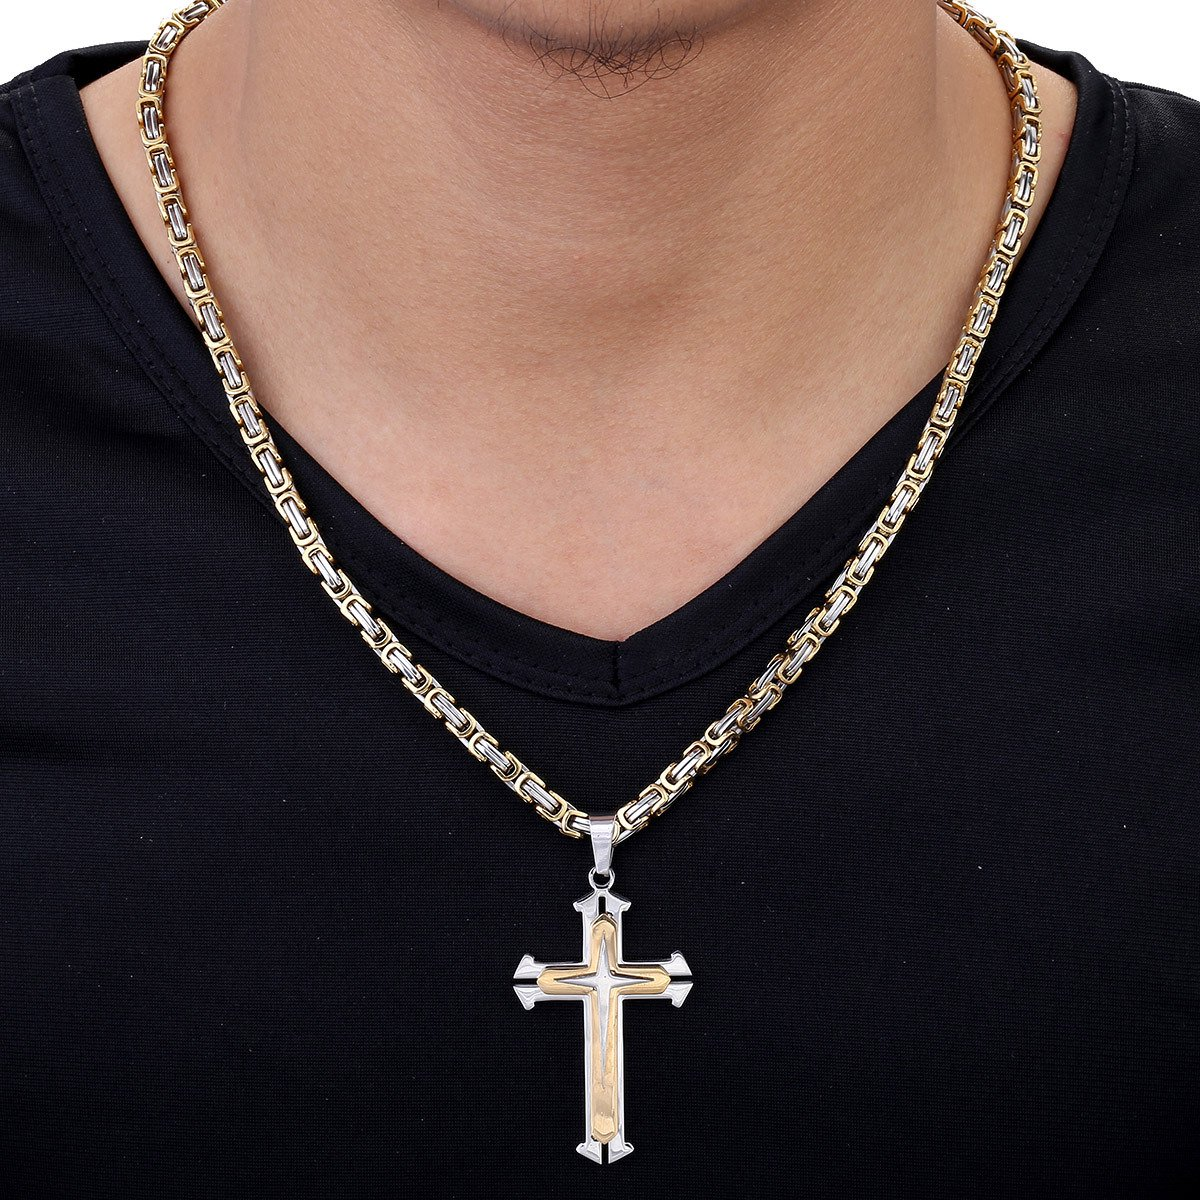 5mm Gold Silver Cross Pendant Necklace Byzantine Chain 18-30inch